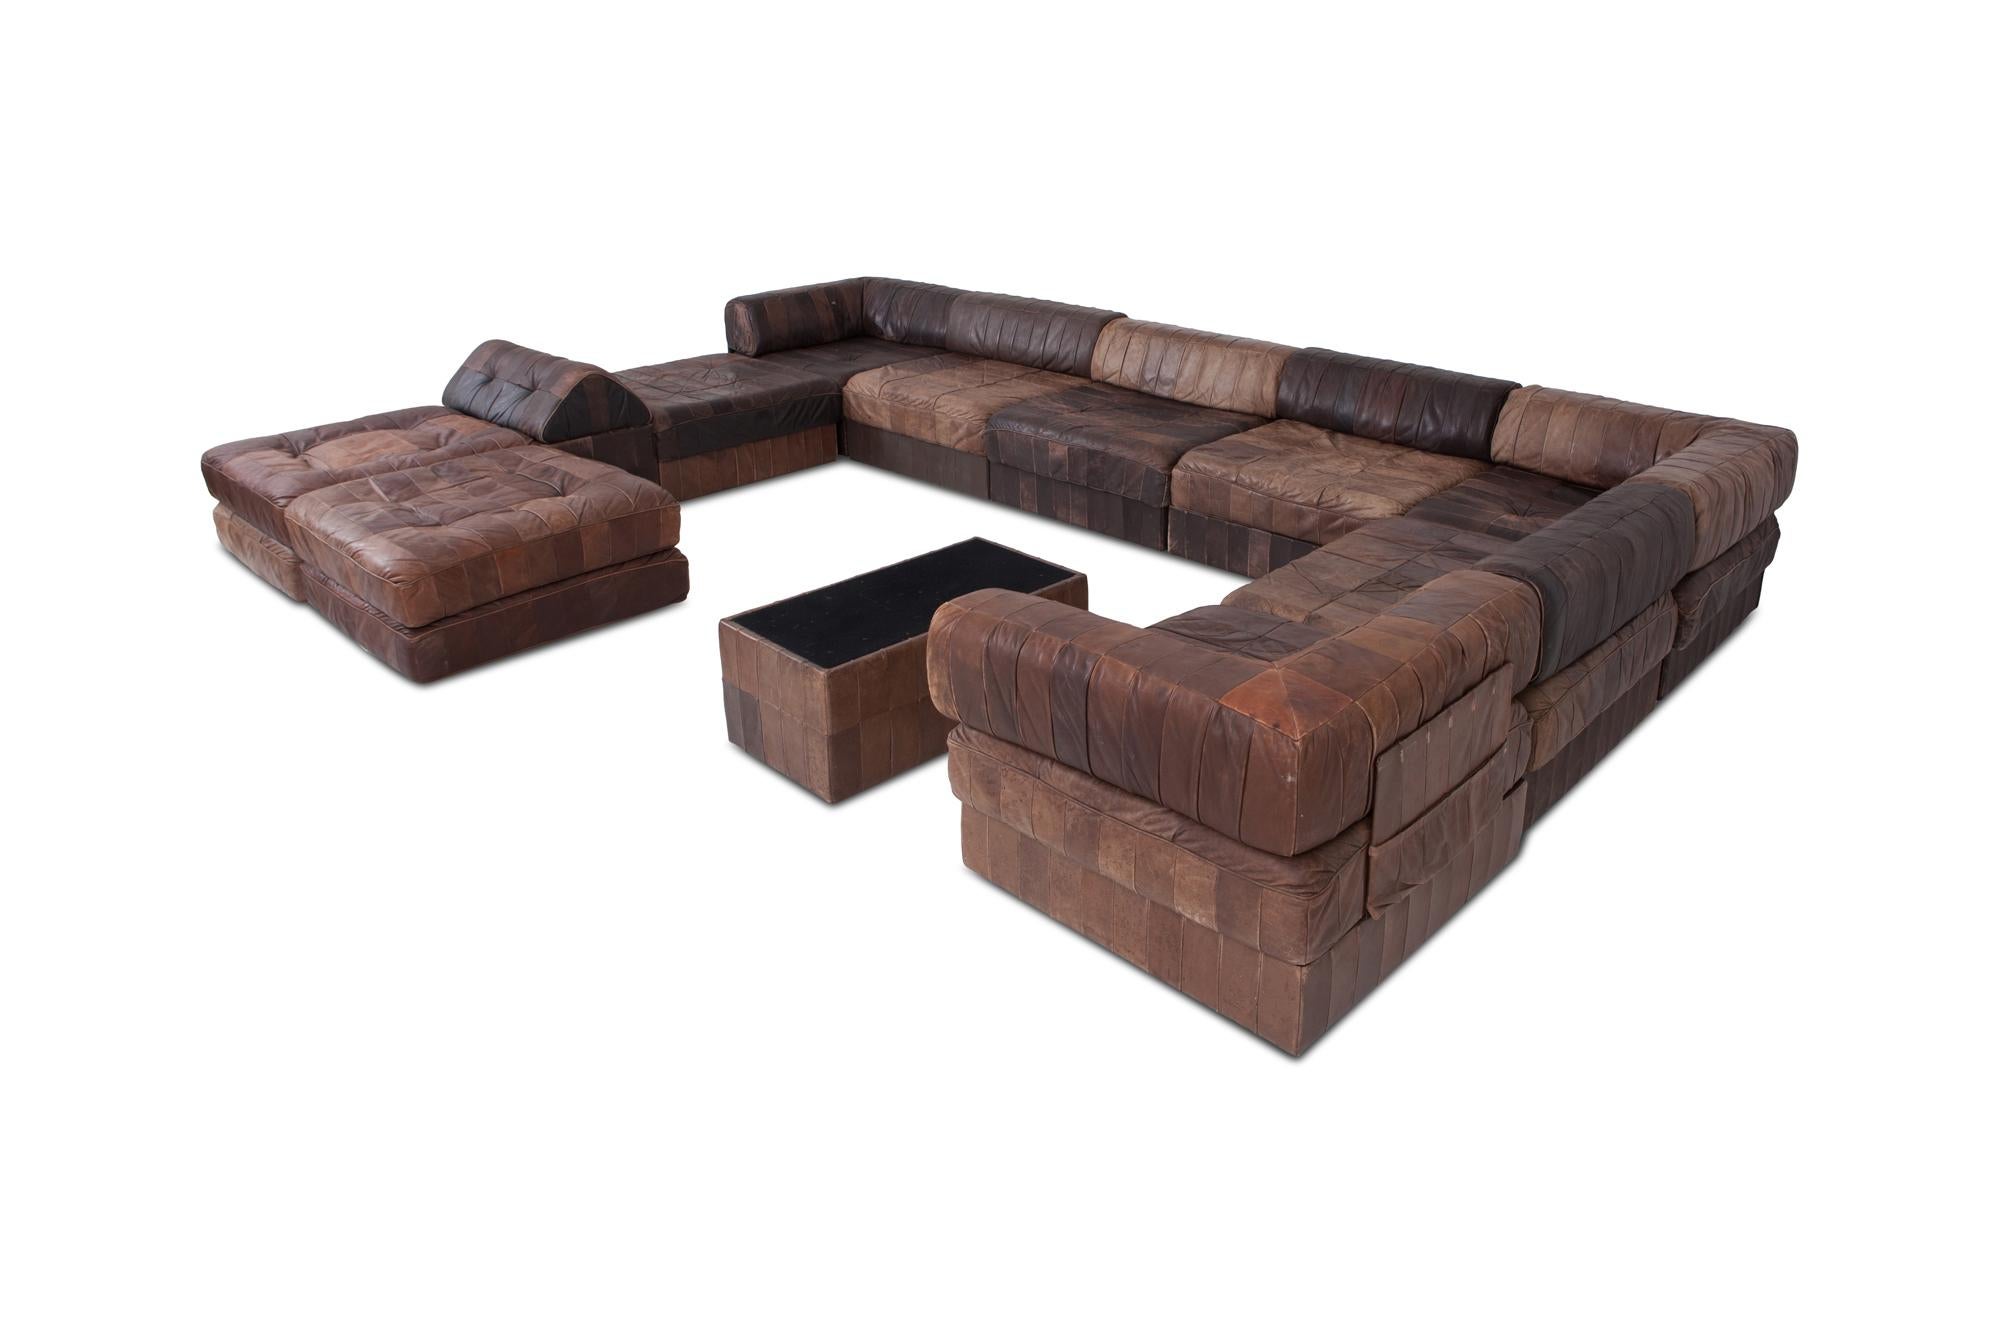 DS 88 sectional sofa in patchwork brown-cognac leather.
Hand built in the 1970s/1980s to incredibly high standards by De Sede craftsman in Switzerland.

Made of eight sections, each with a base leather patchwork cushion and a back cushion made from